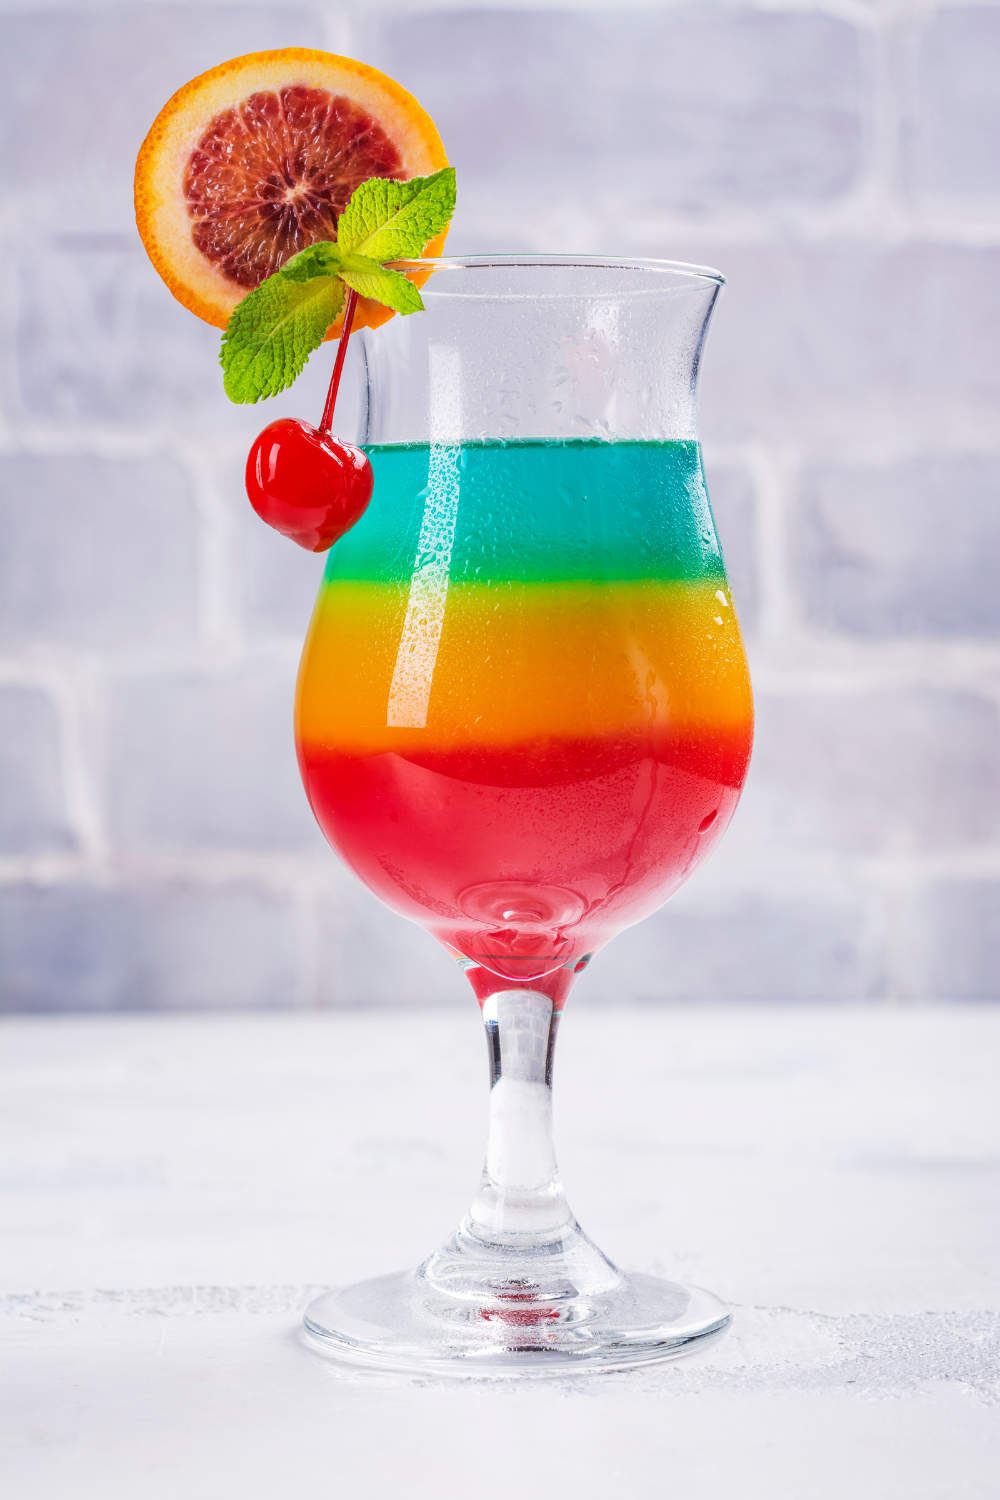 Chili's Captains Castaway Drink Recipe - Find Vegetarian Recipes